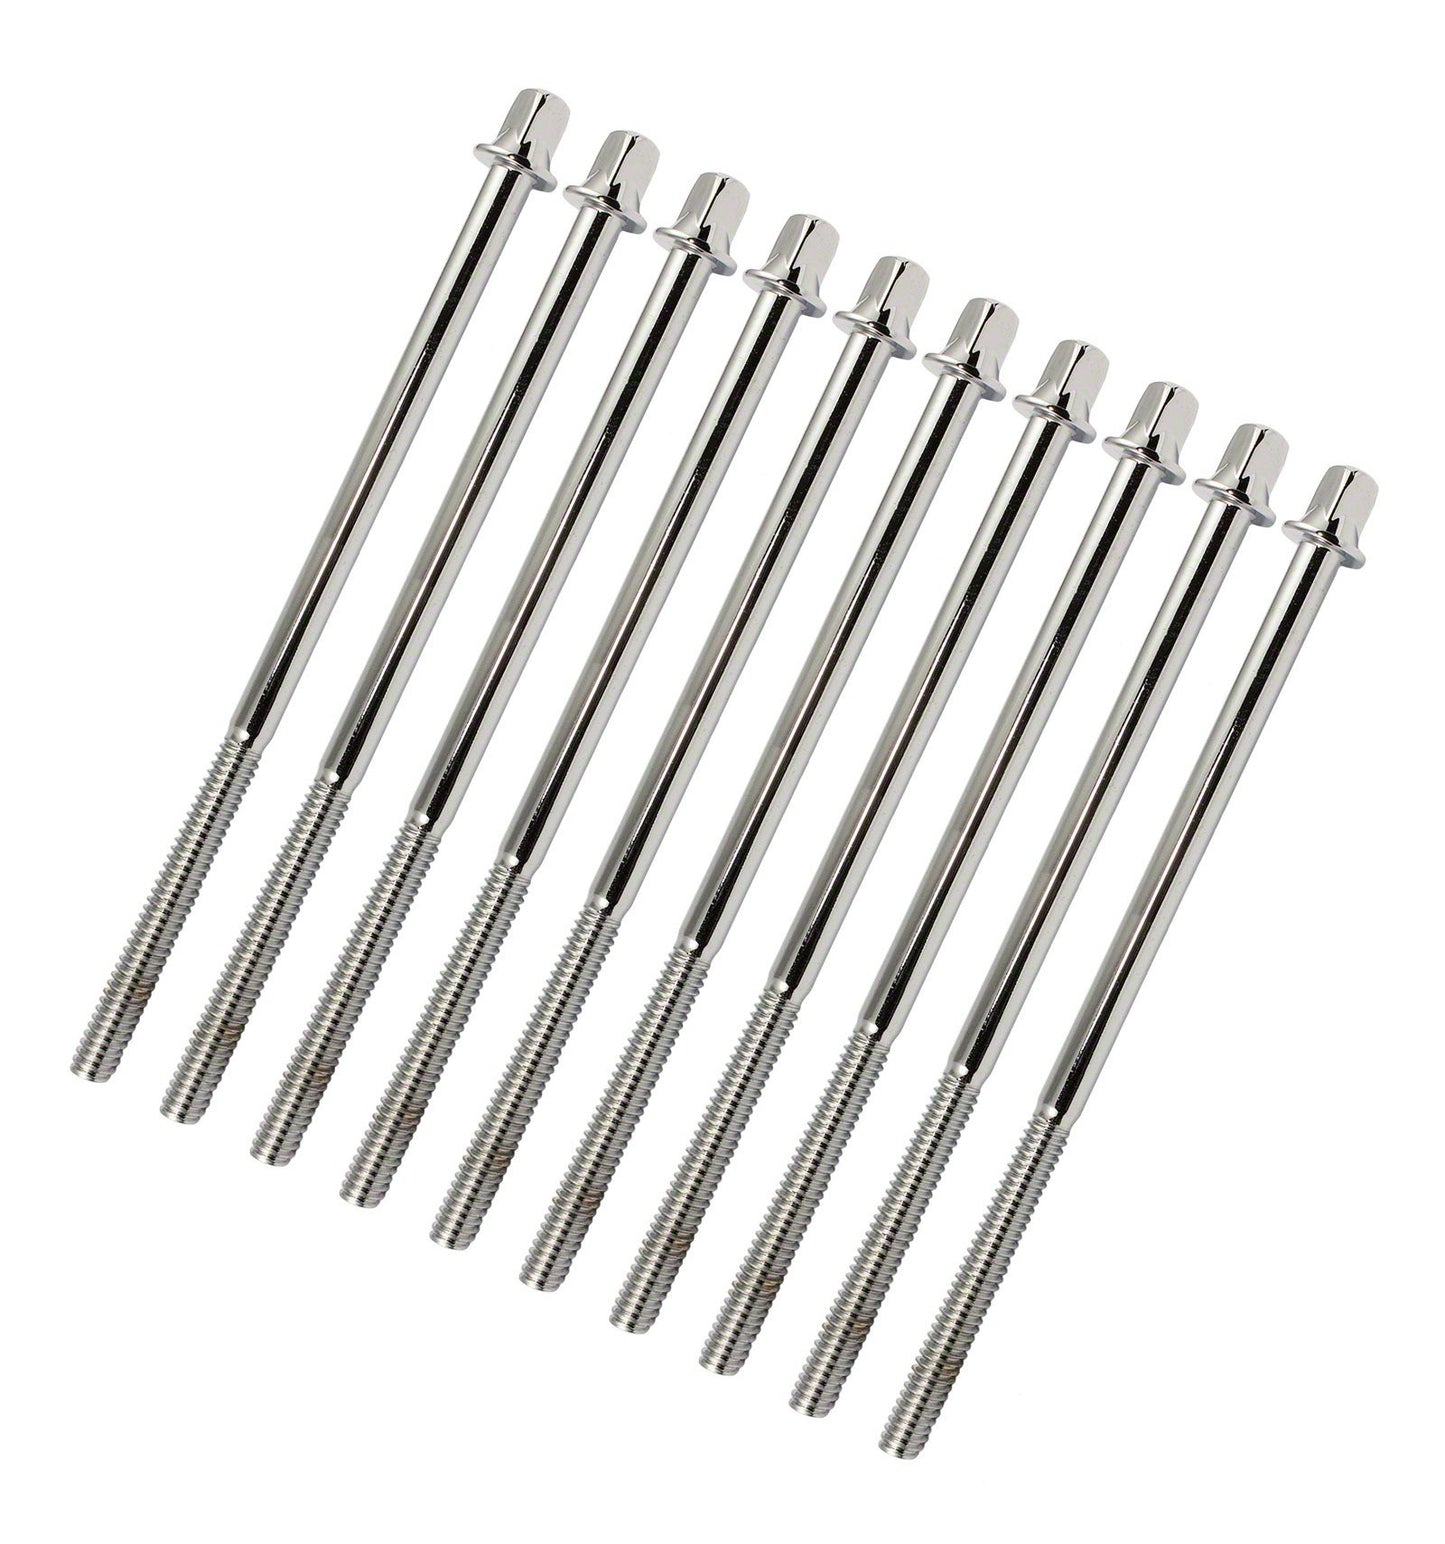 SD 7/32" thread Tension Rod (Pack of 10) - TRC